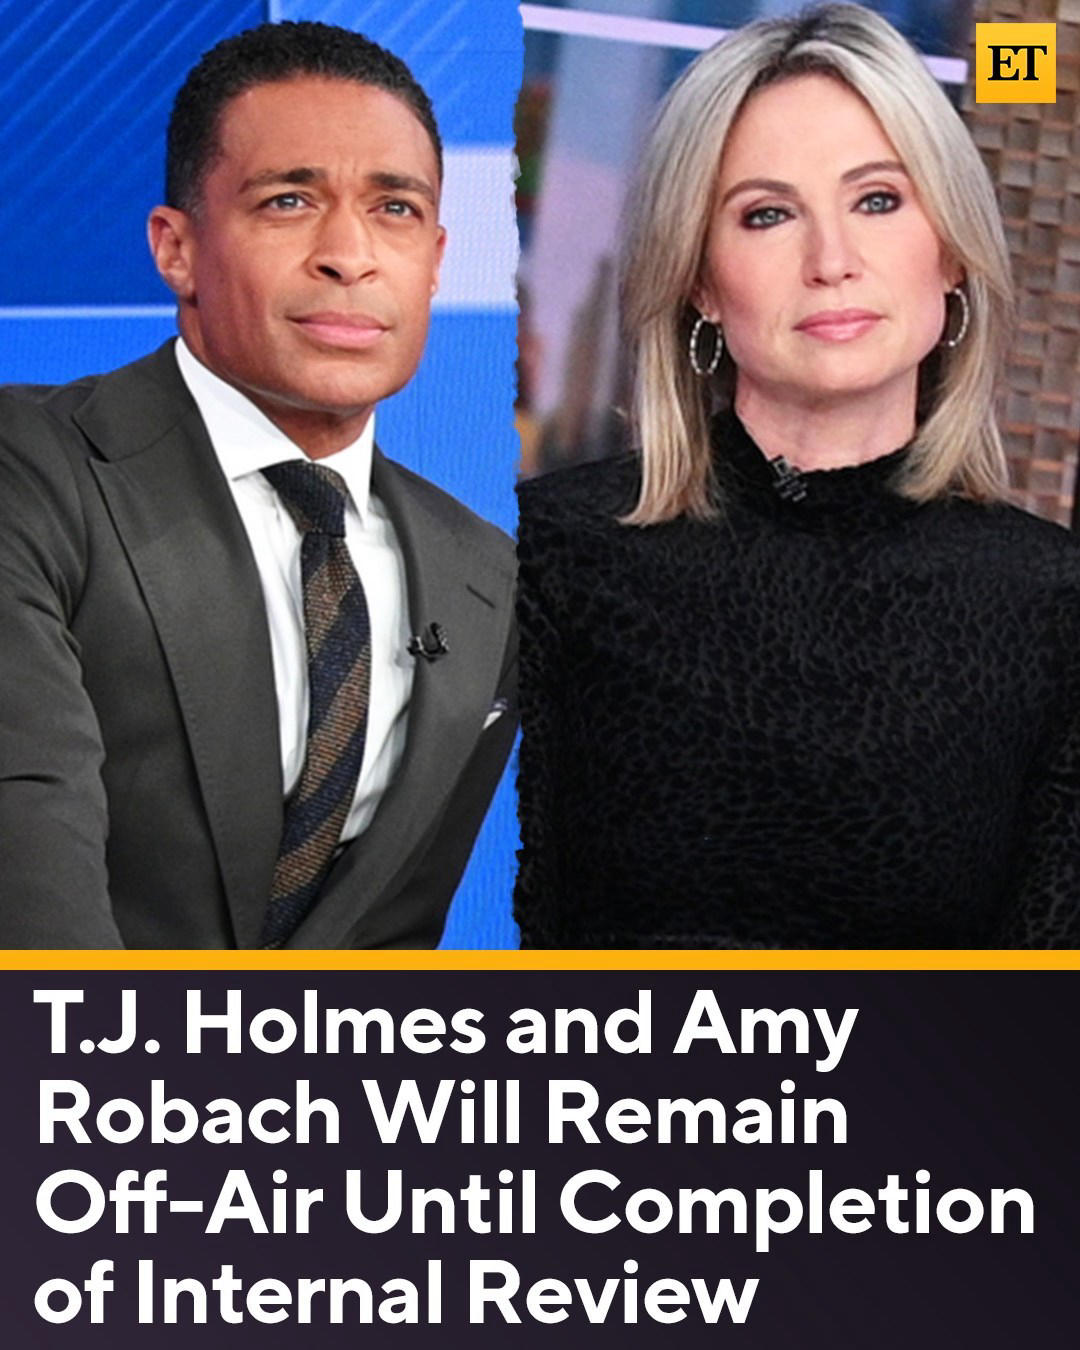 image  1 Entertainment Tonight - Don't expect to see Amy Robach and T